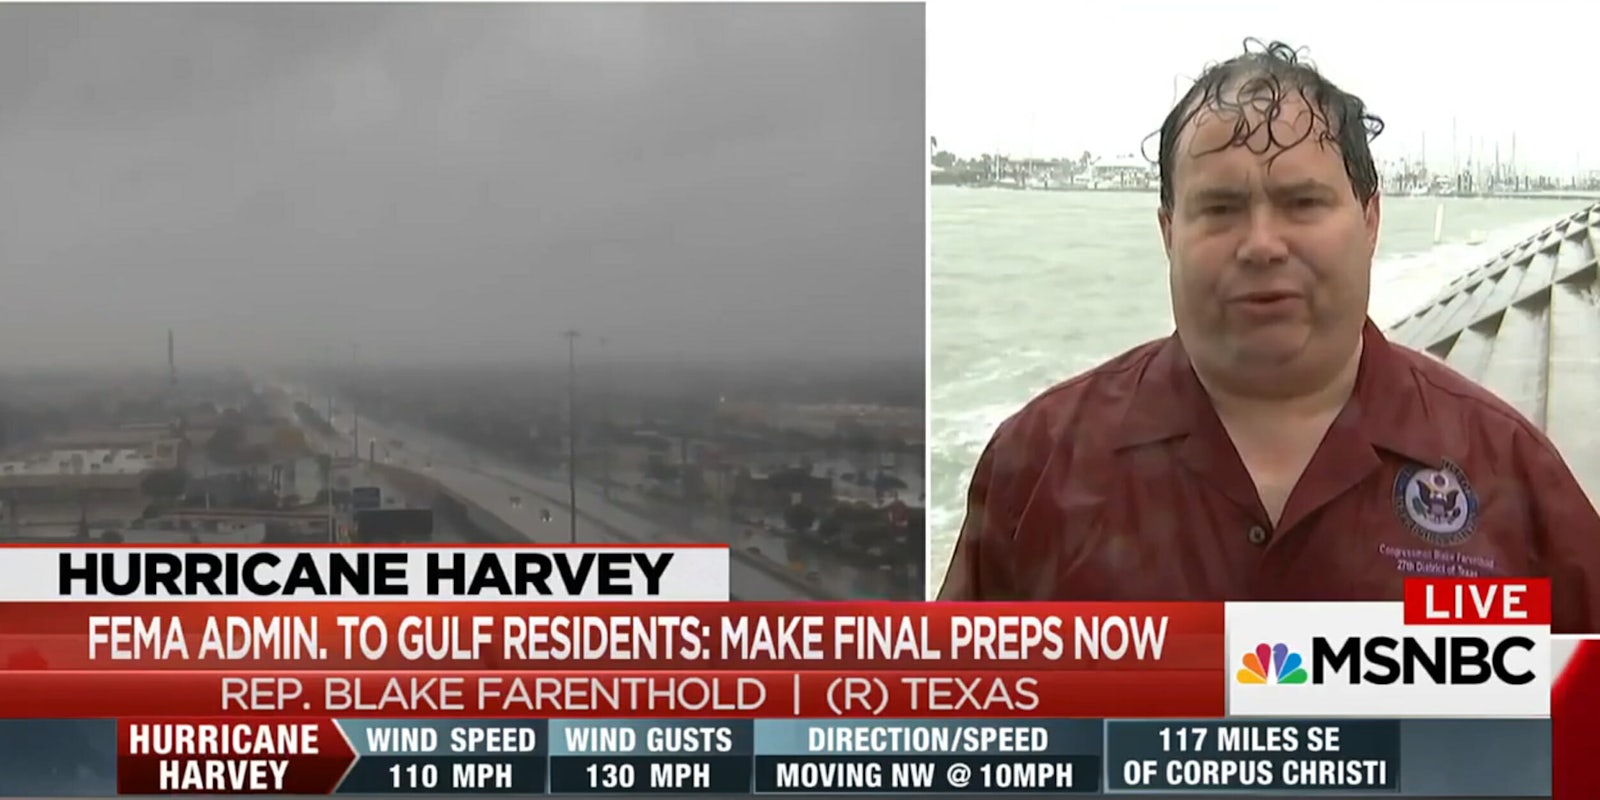 Rep. Blake Farenthold (R-Tx.) spoke about Hurricane Harvey and got completely soaked.